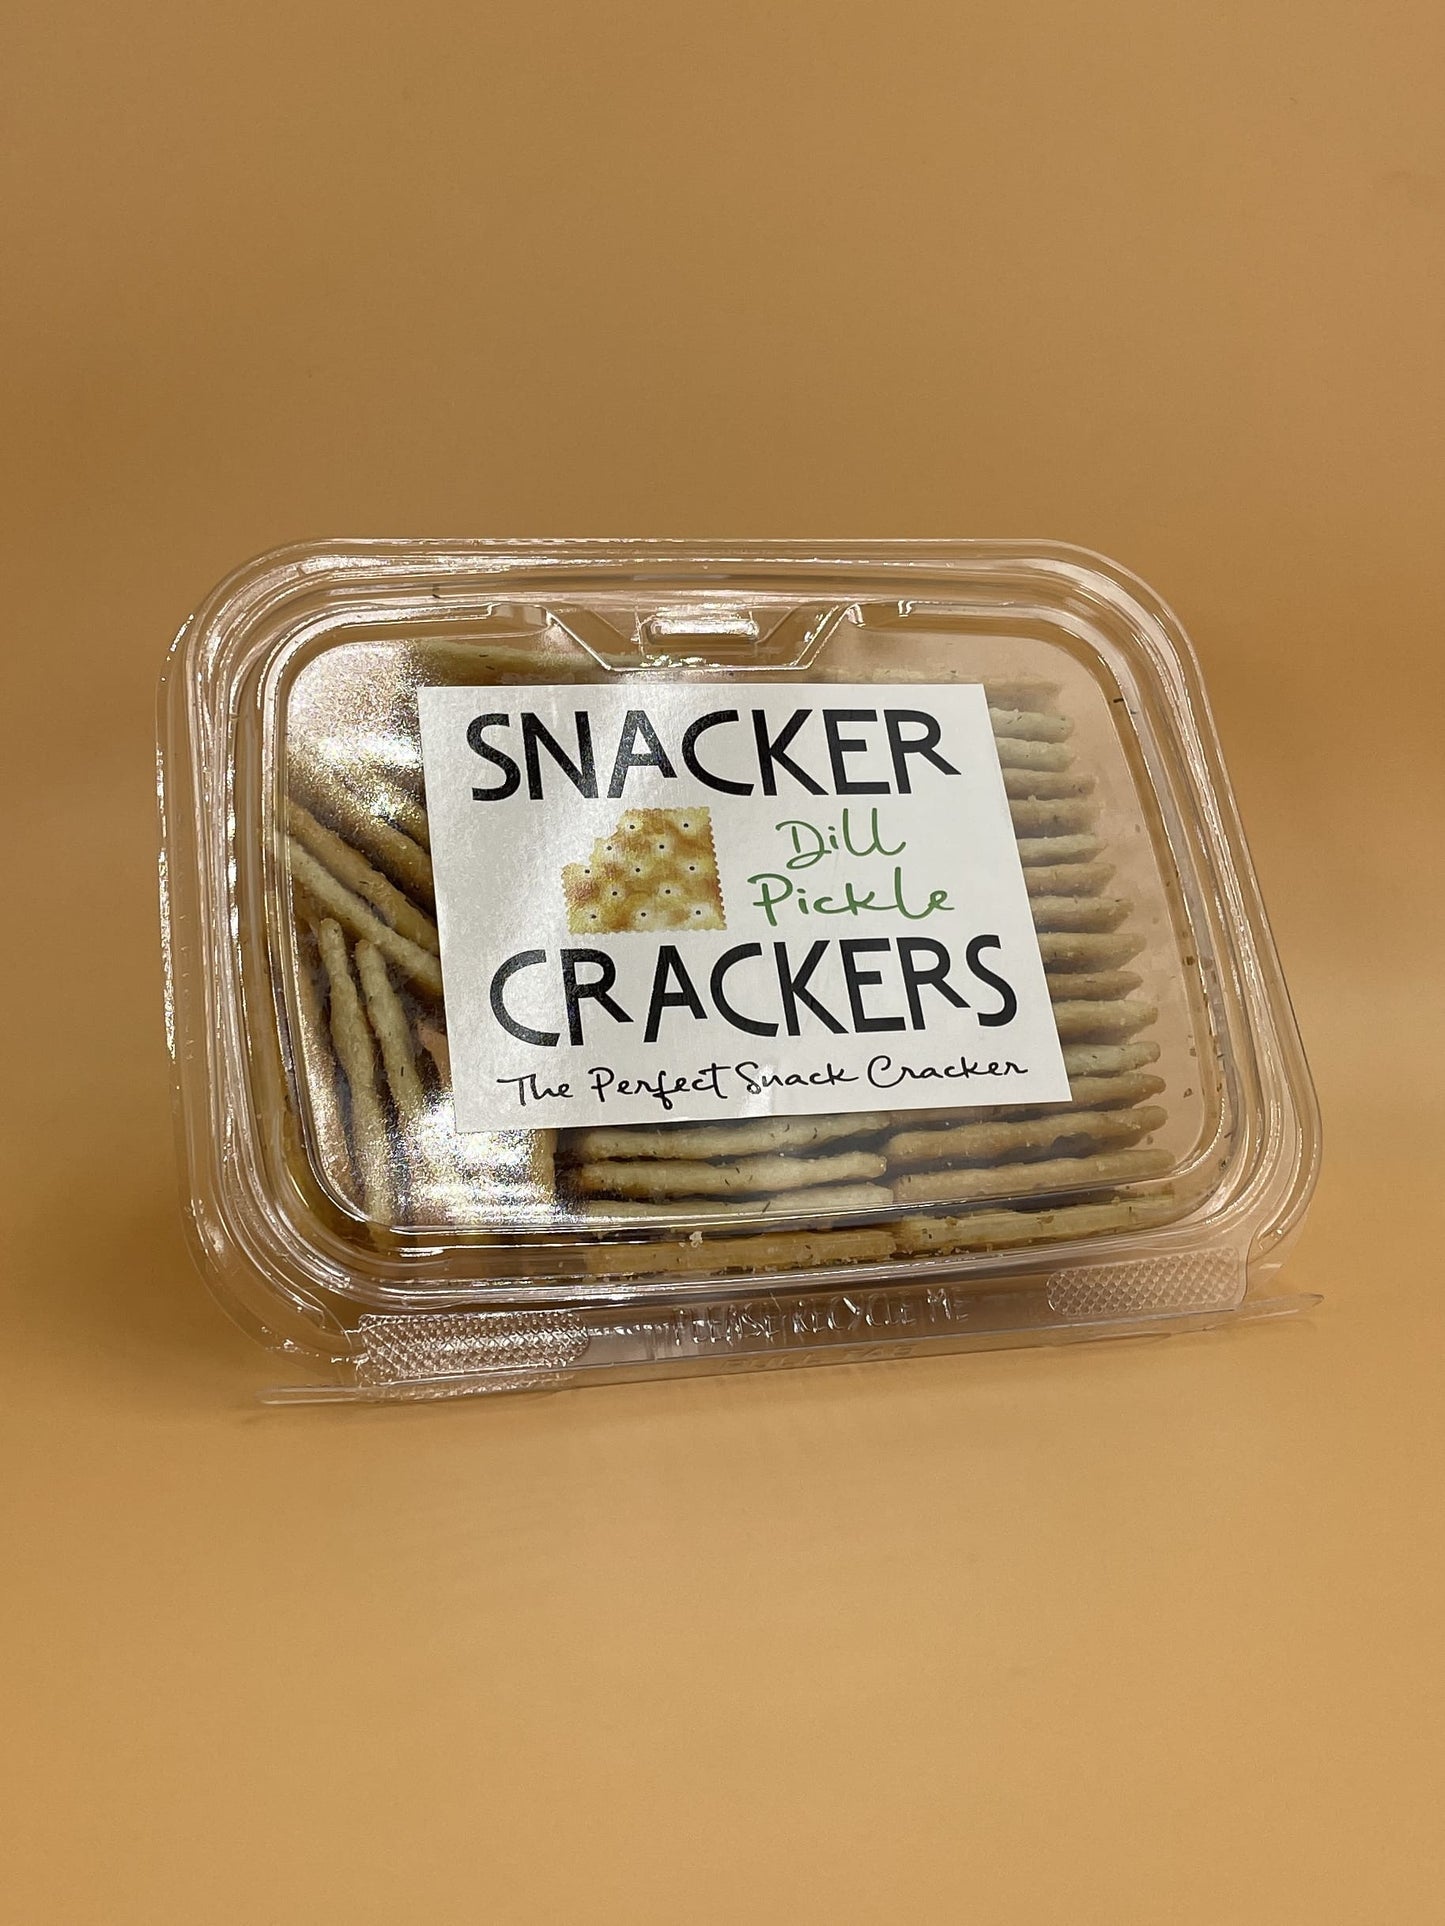 Snacker Crackers Dill Pickle Saltines